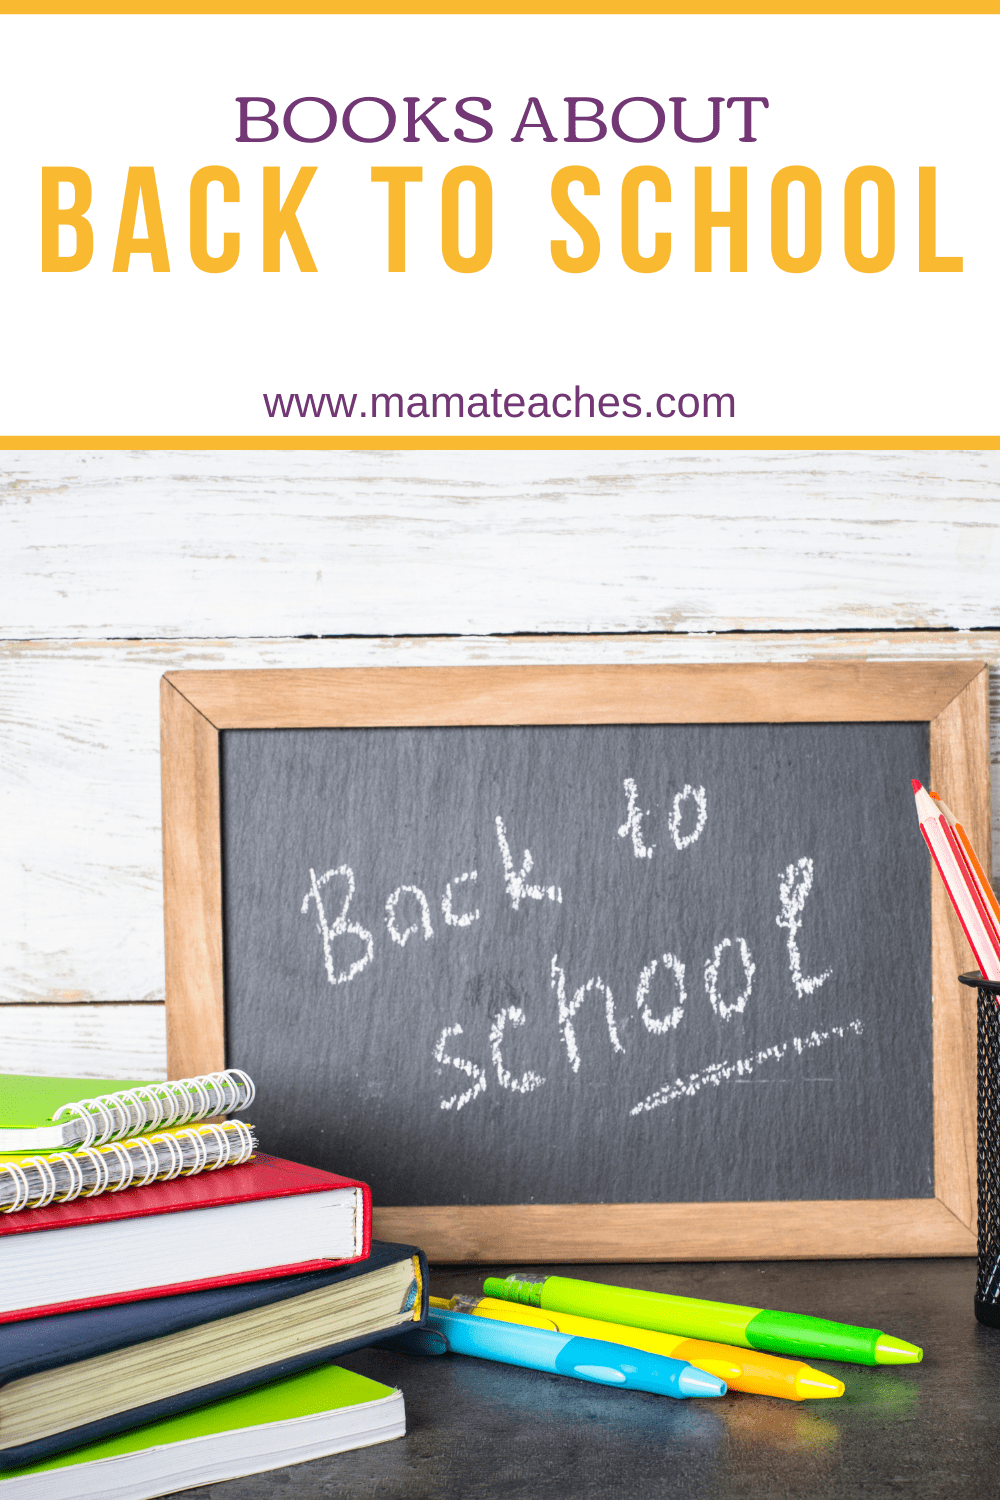 Books About Back to School